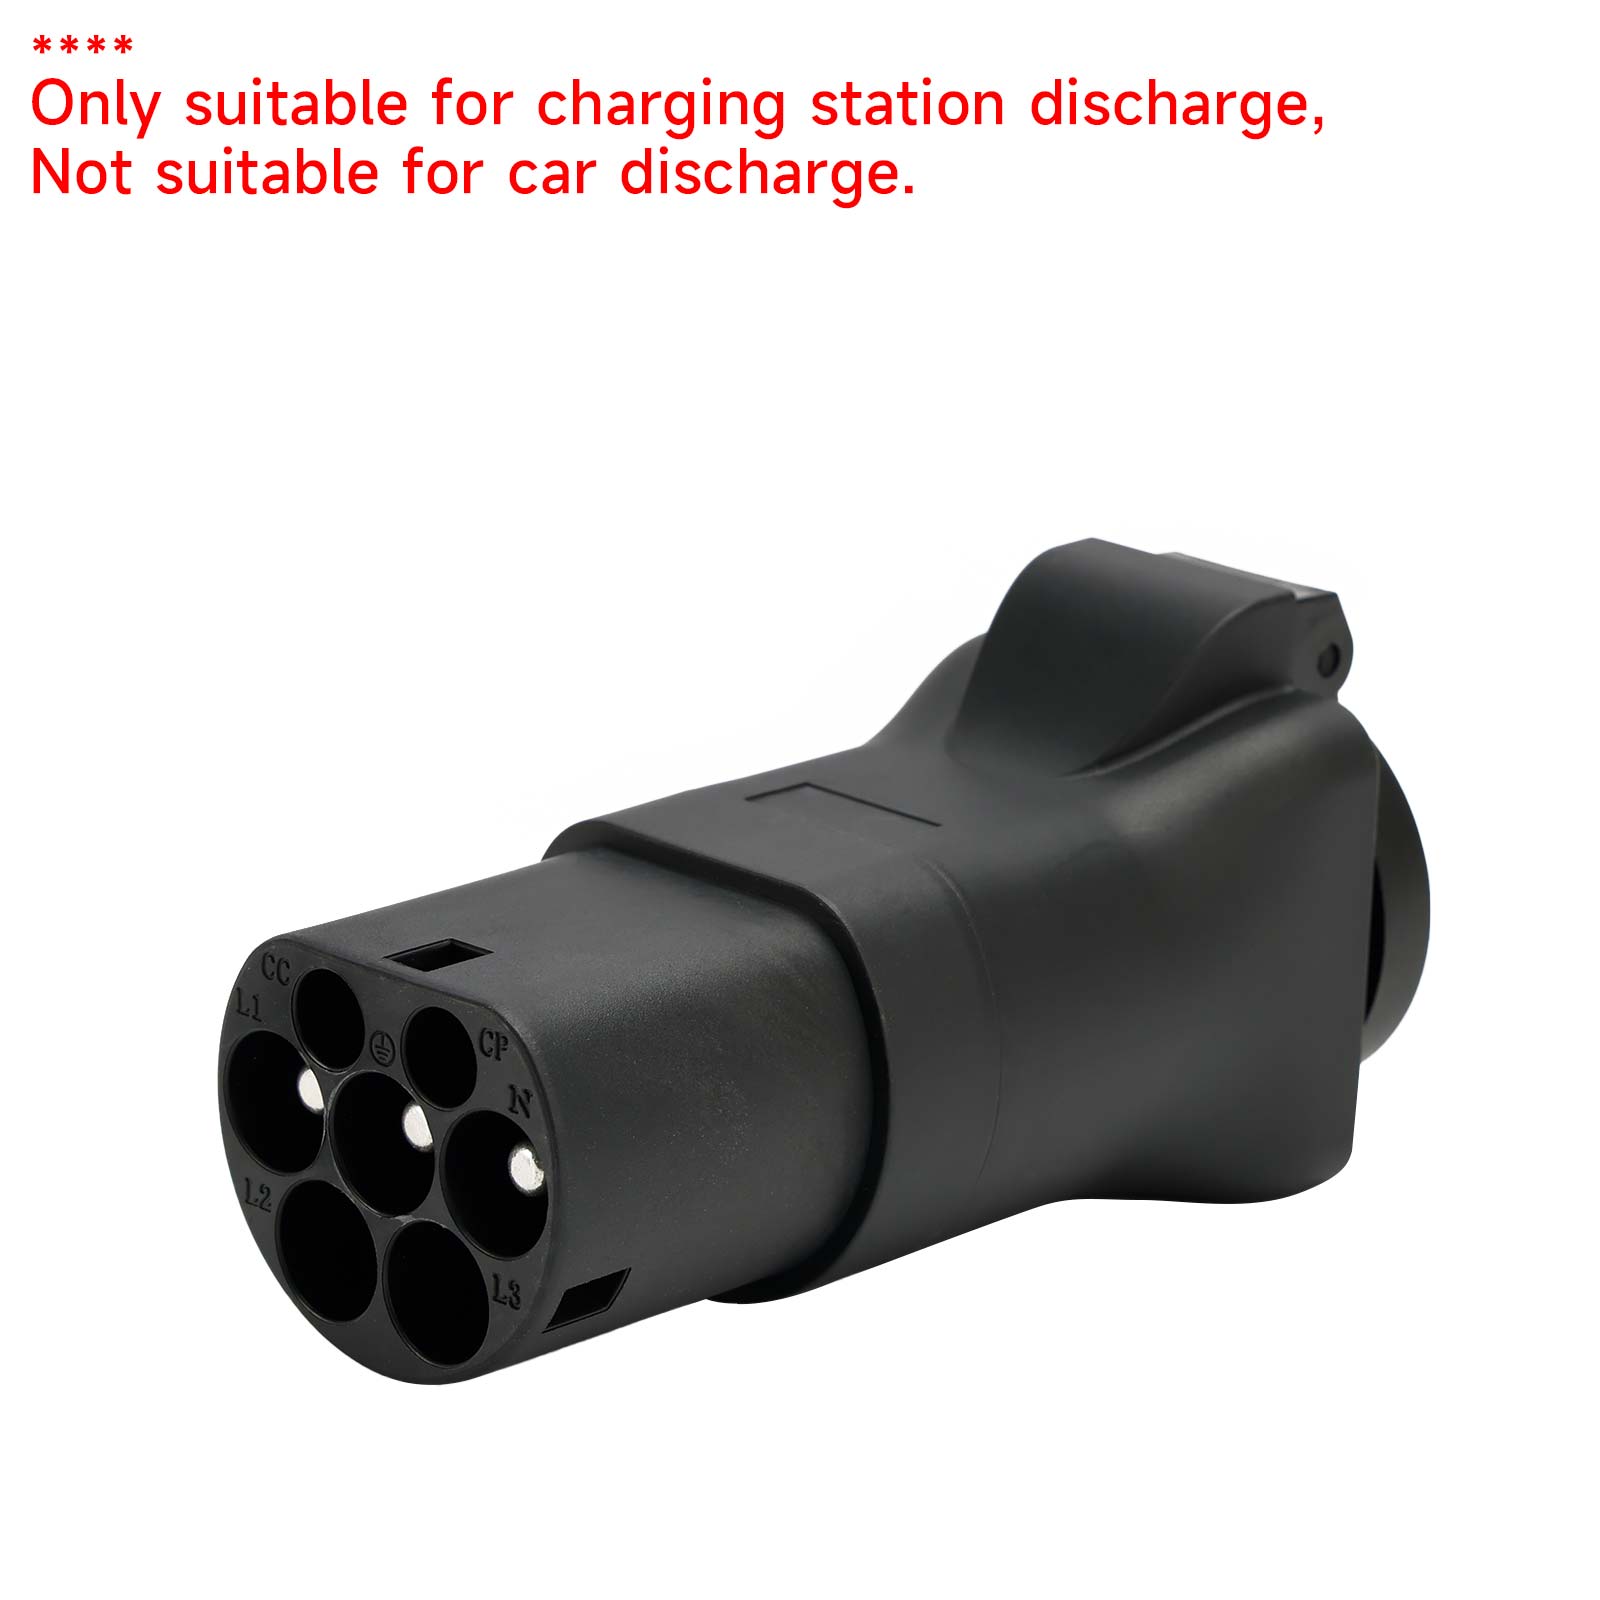 V2L Type 2 to Euro Plug Discharge EV Charger Adapter 16A EVSE IEC 62196 Plug